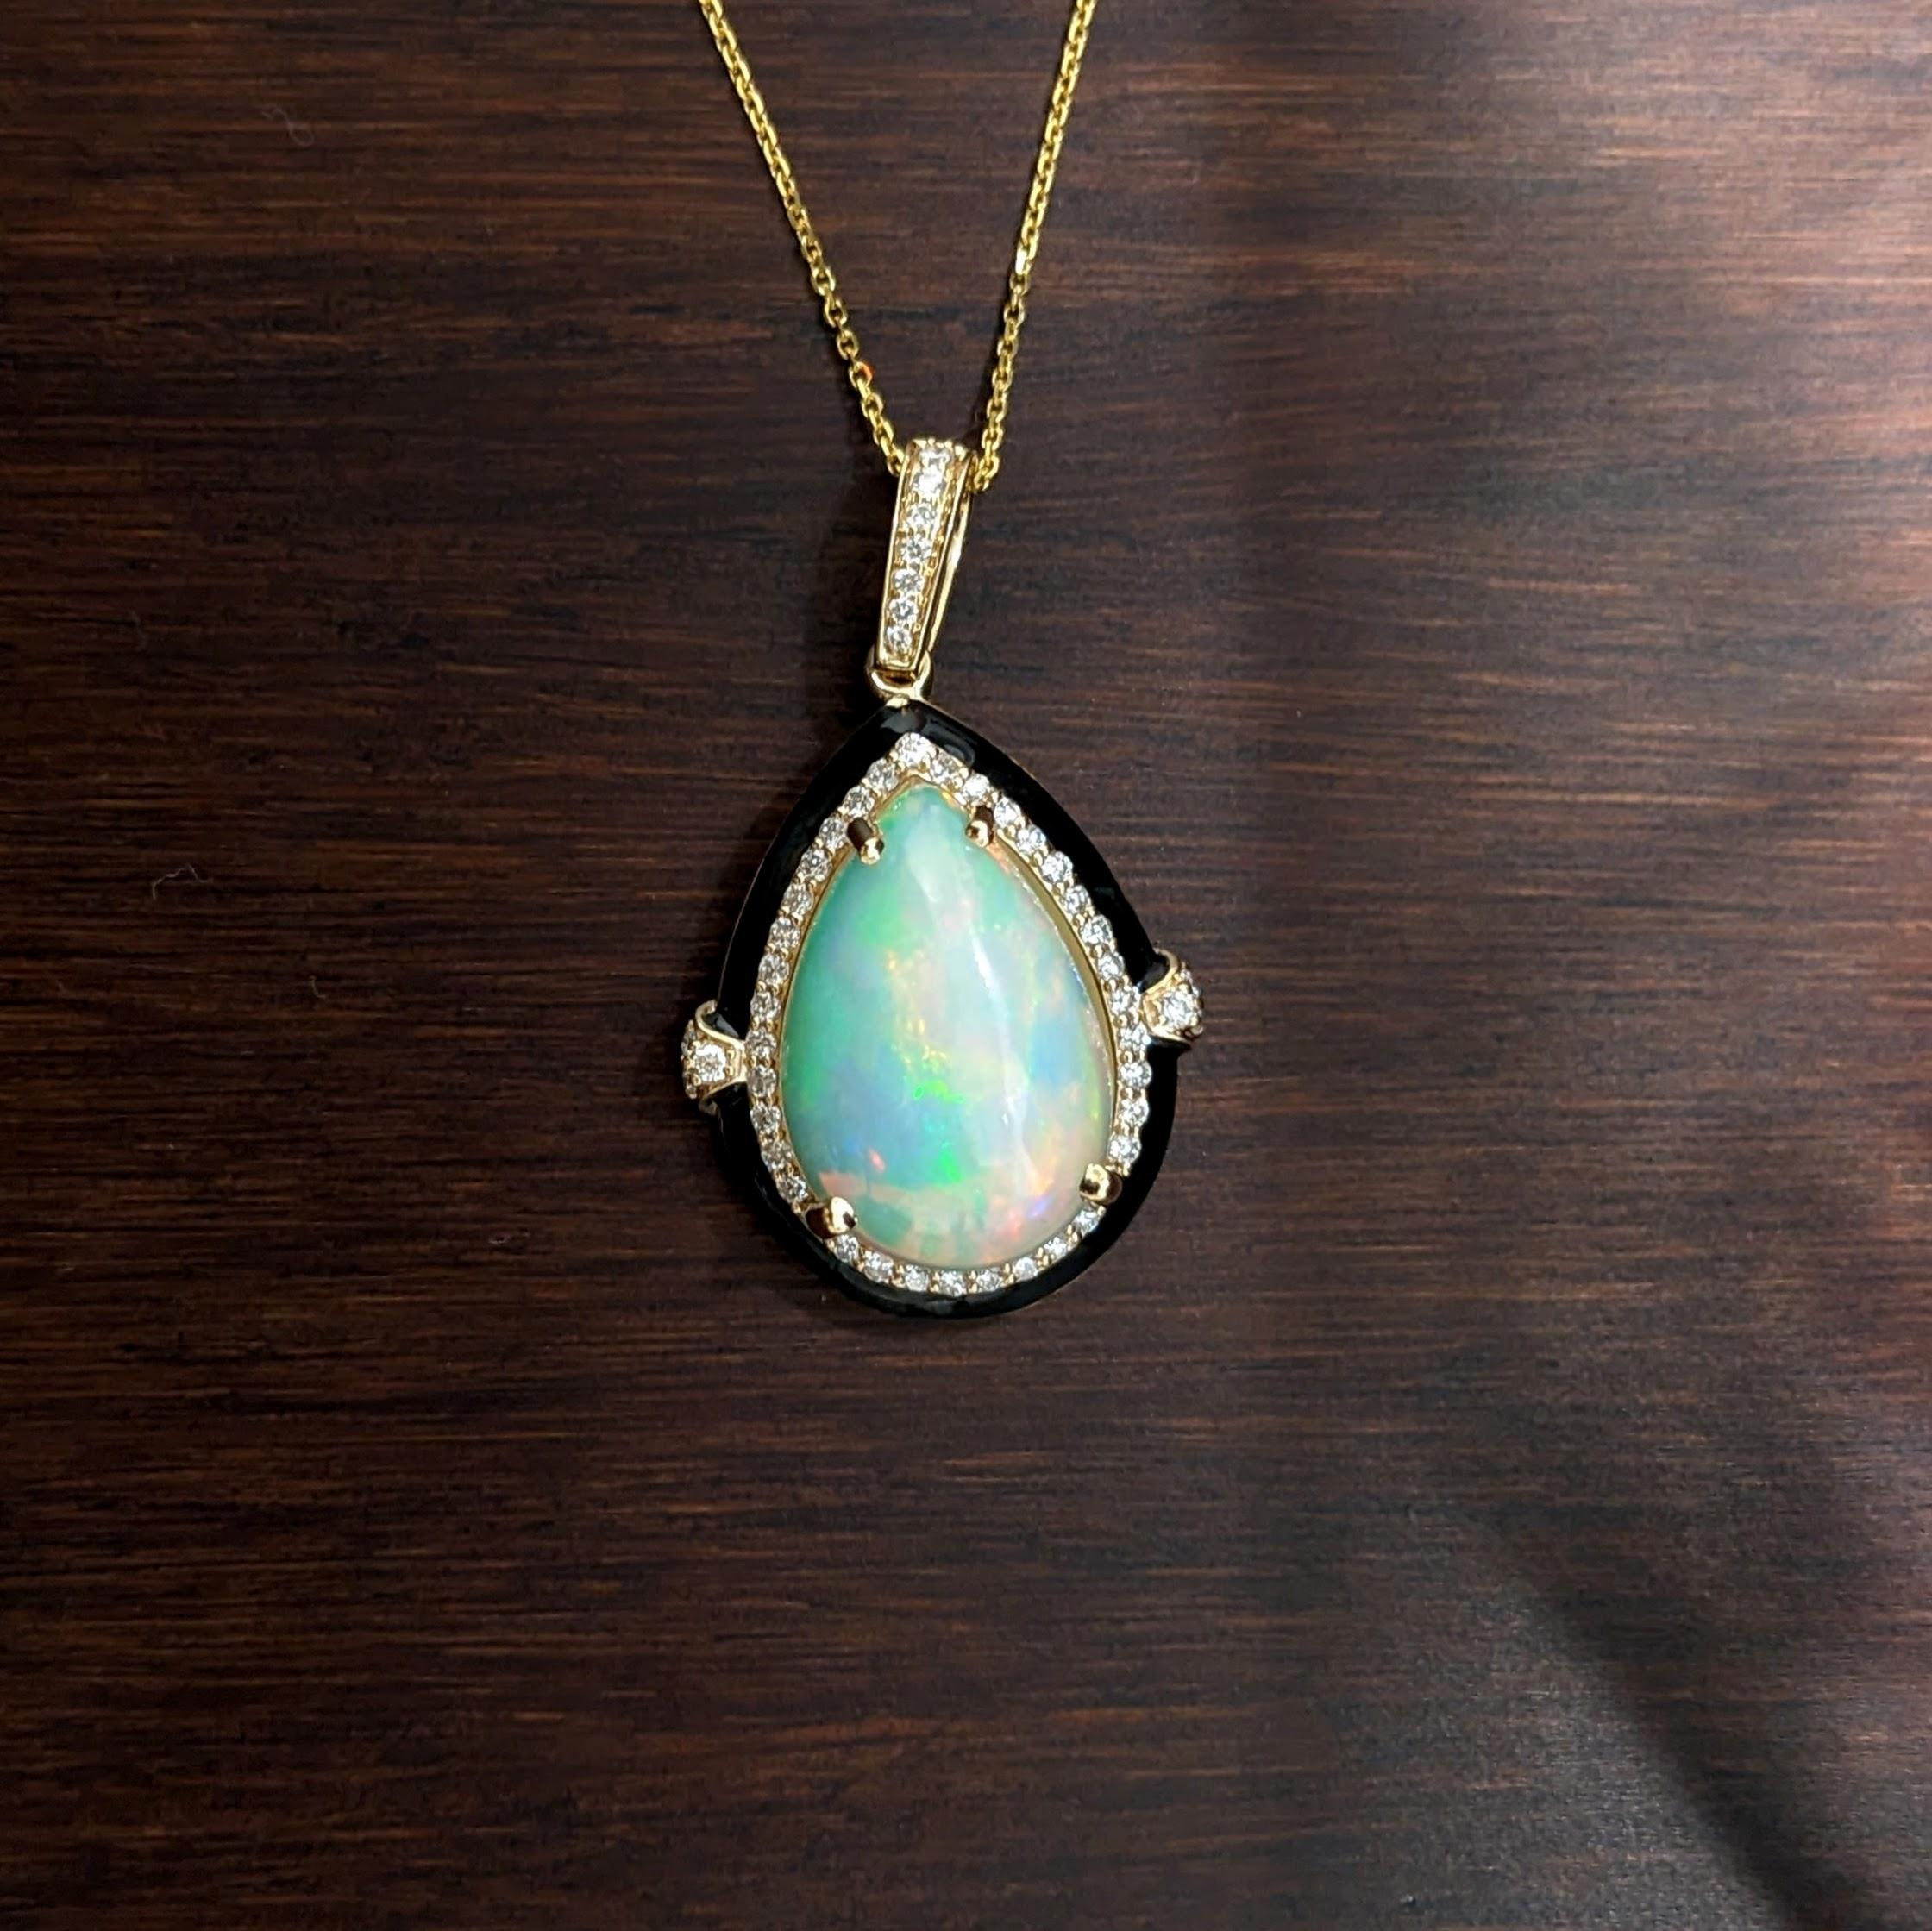 A simply stunning new NNJ pendant design featuring a gorgeous play of color pear shape cabochon opal with a natural diamond halo and black enamel. A perfect contrast to make those fiery colors pop! This is a must have for opal lovers, a classy and